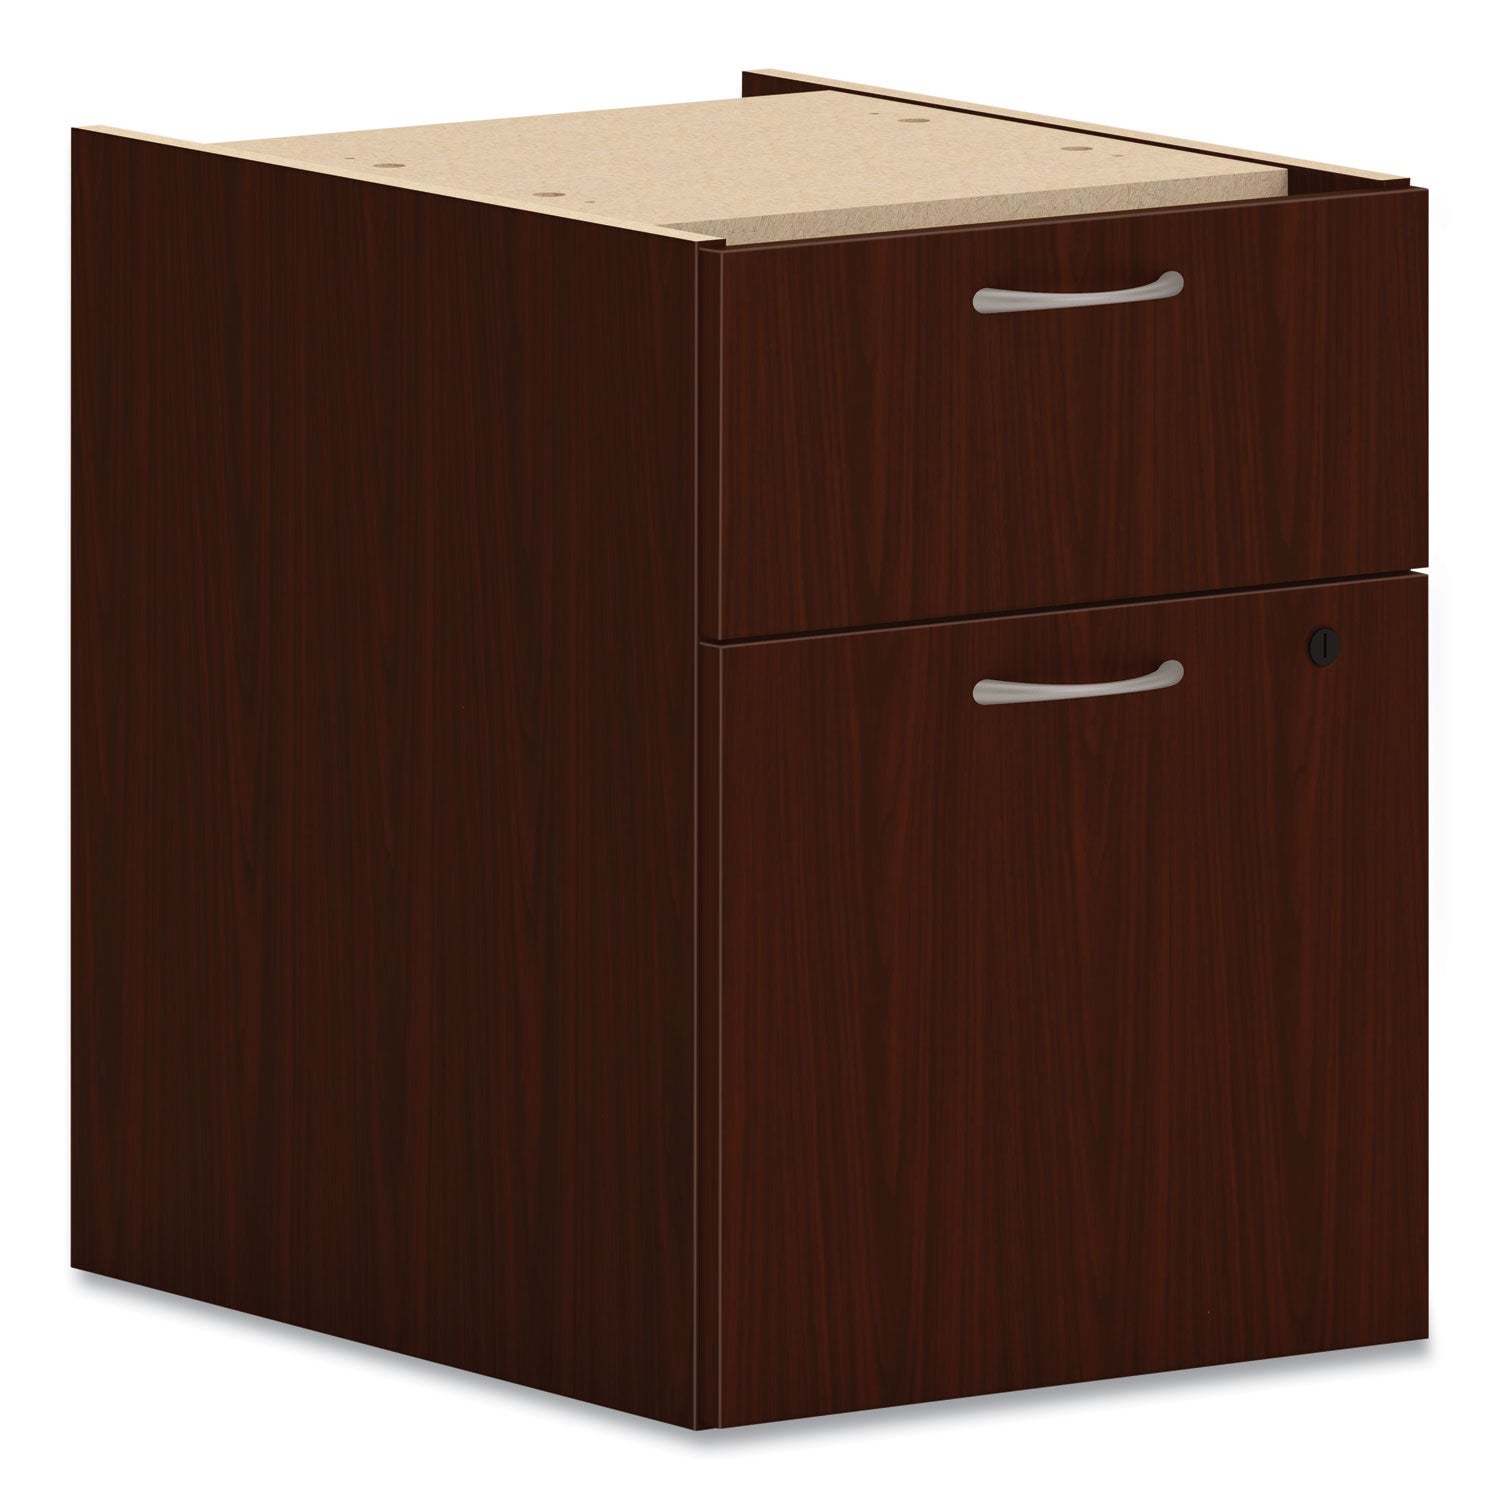 mod-hanging-pedestal-left-or-right-2-drawers-box-file-legal-letter-traditional-mahogany-15-x-20-x-20_honplphbflt1 - 1